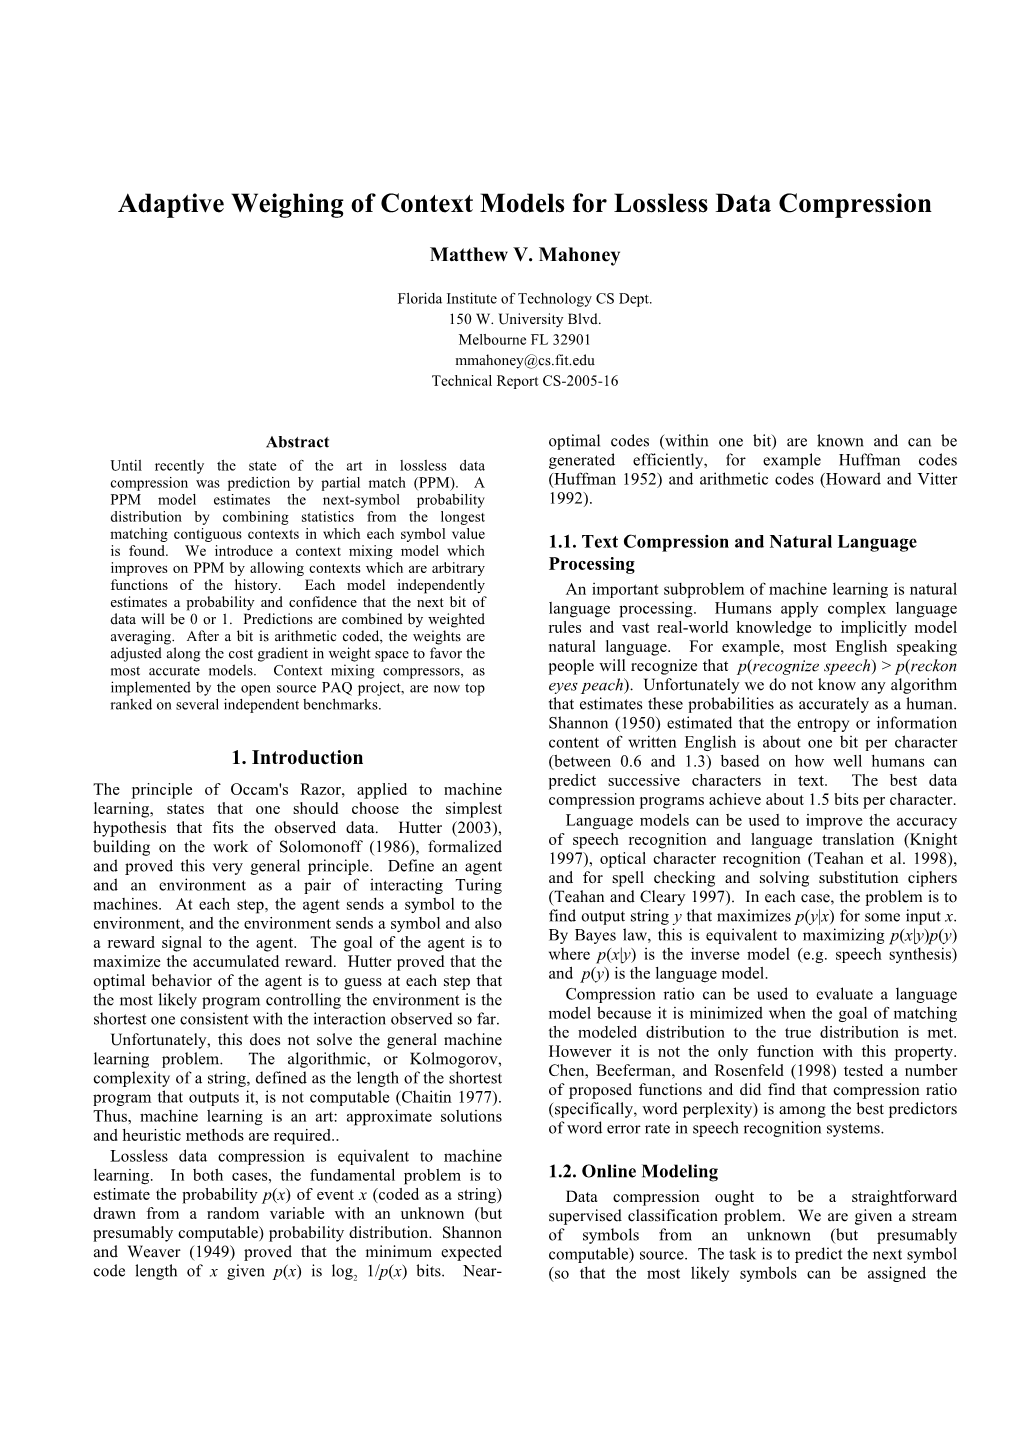 Adaptive Weighing of Context Models for Lossless Data Compression